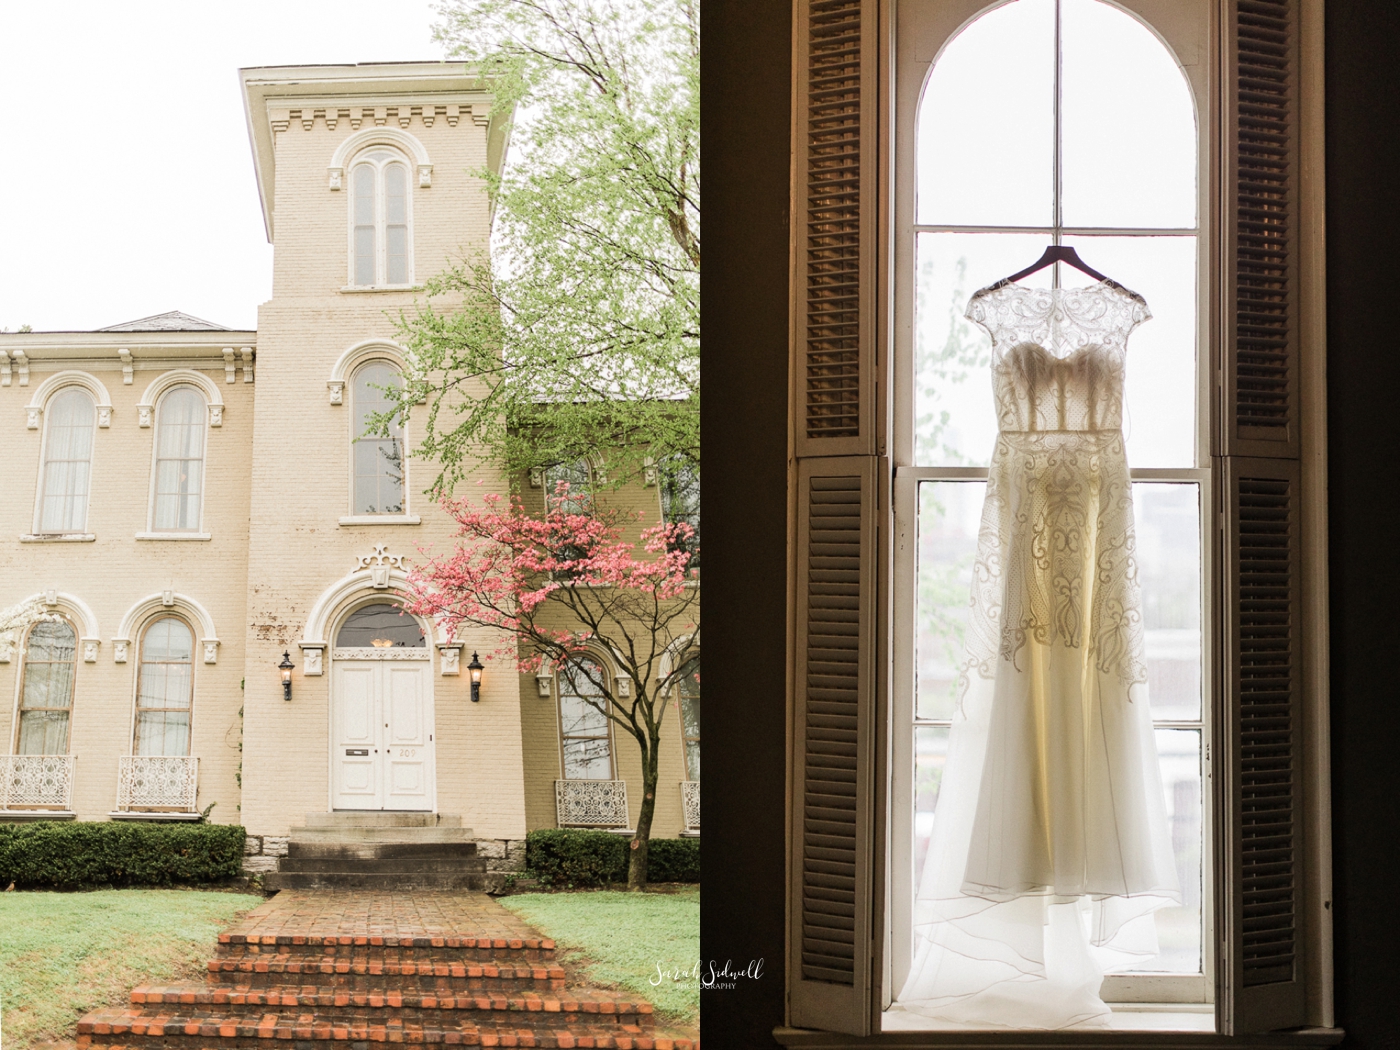 A dress hangs in front of the entrance to East Ivy Mansion.